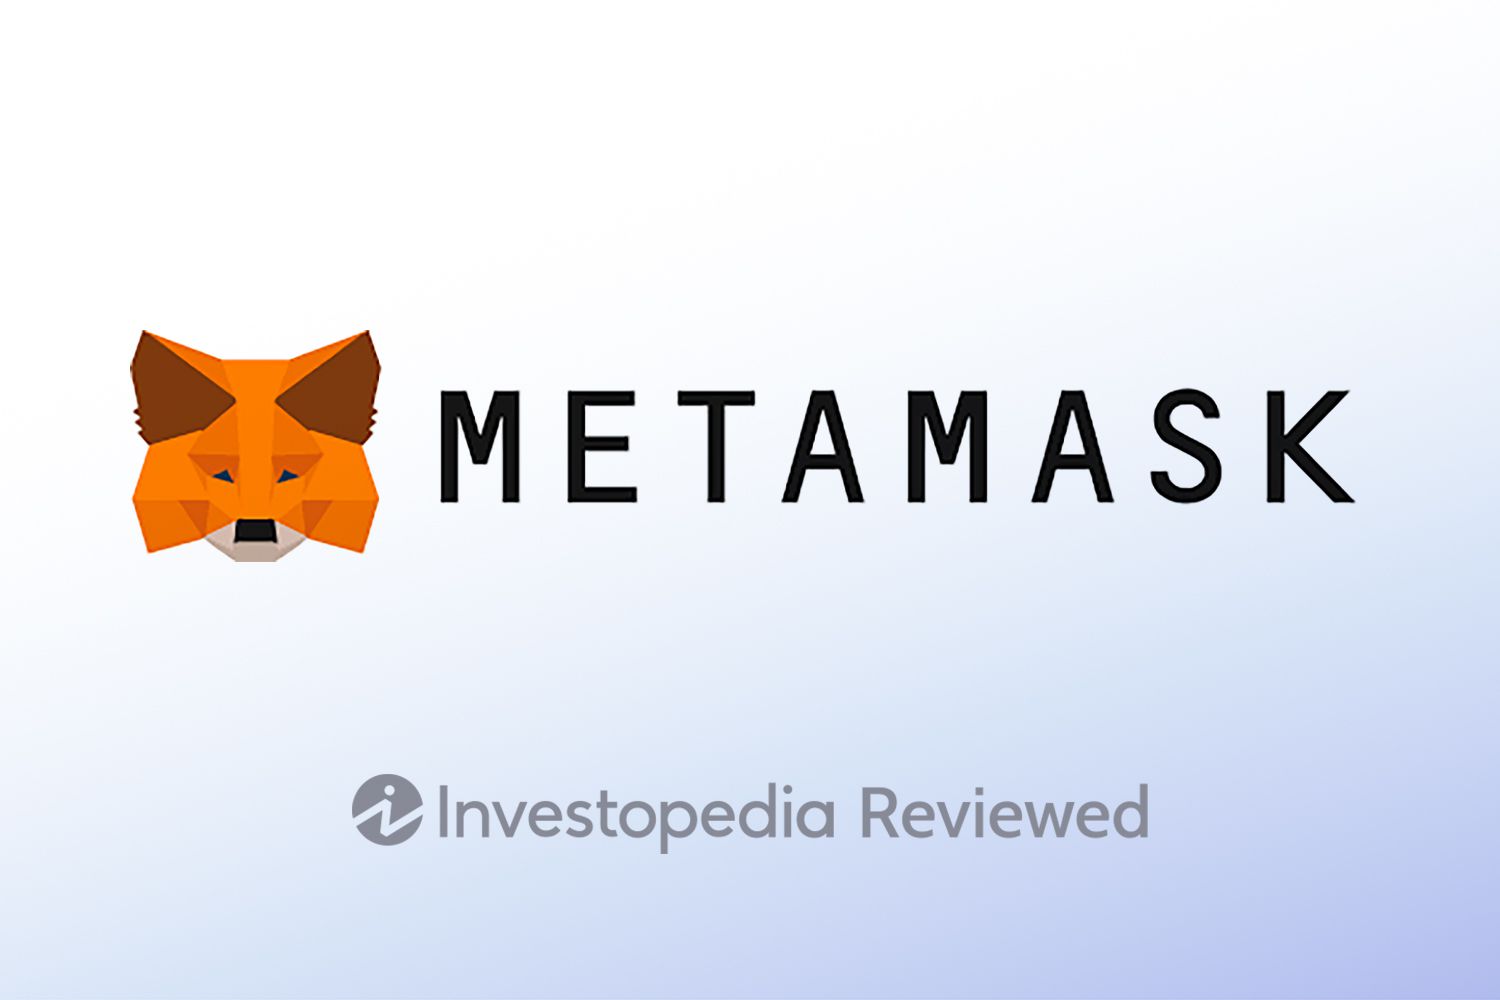 Why choose Metamask for your digital wallet needs?